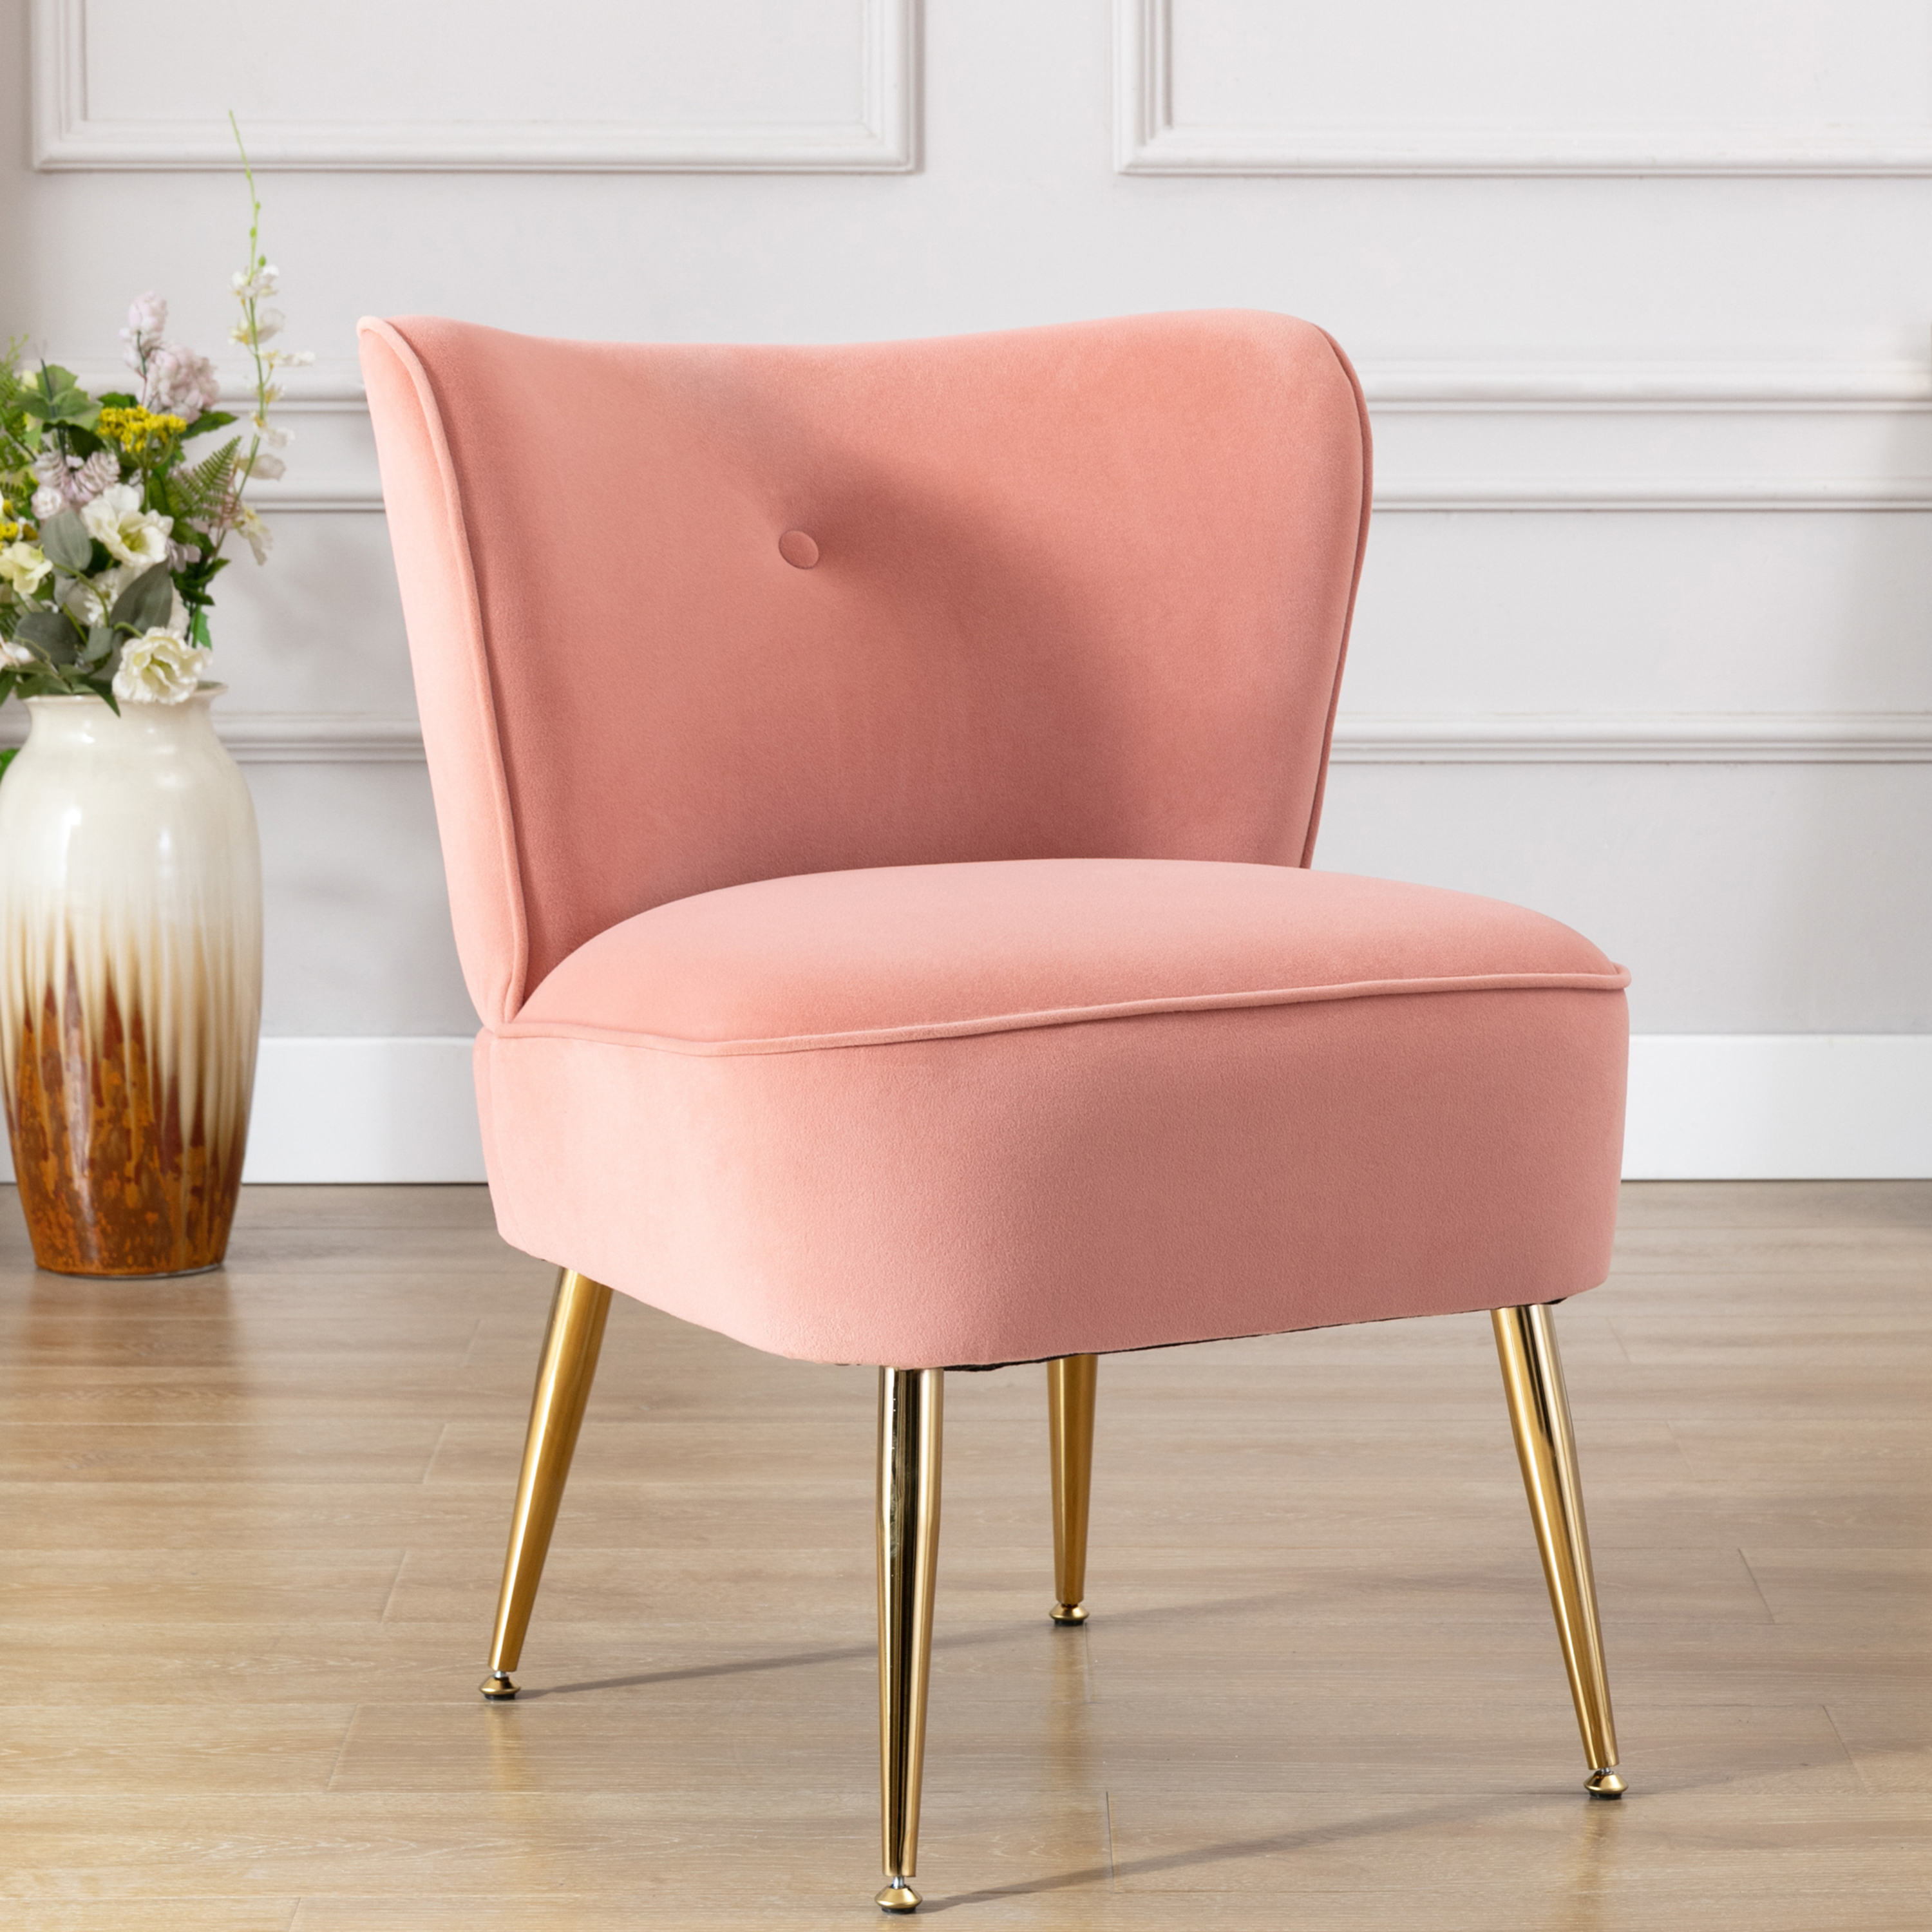 Accent Living Room Side Wingback Chair Pink Velvet Fabric Upholstered Seat Chairs Occasional Bedroom  Leisure Chairs-Boyel Living